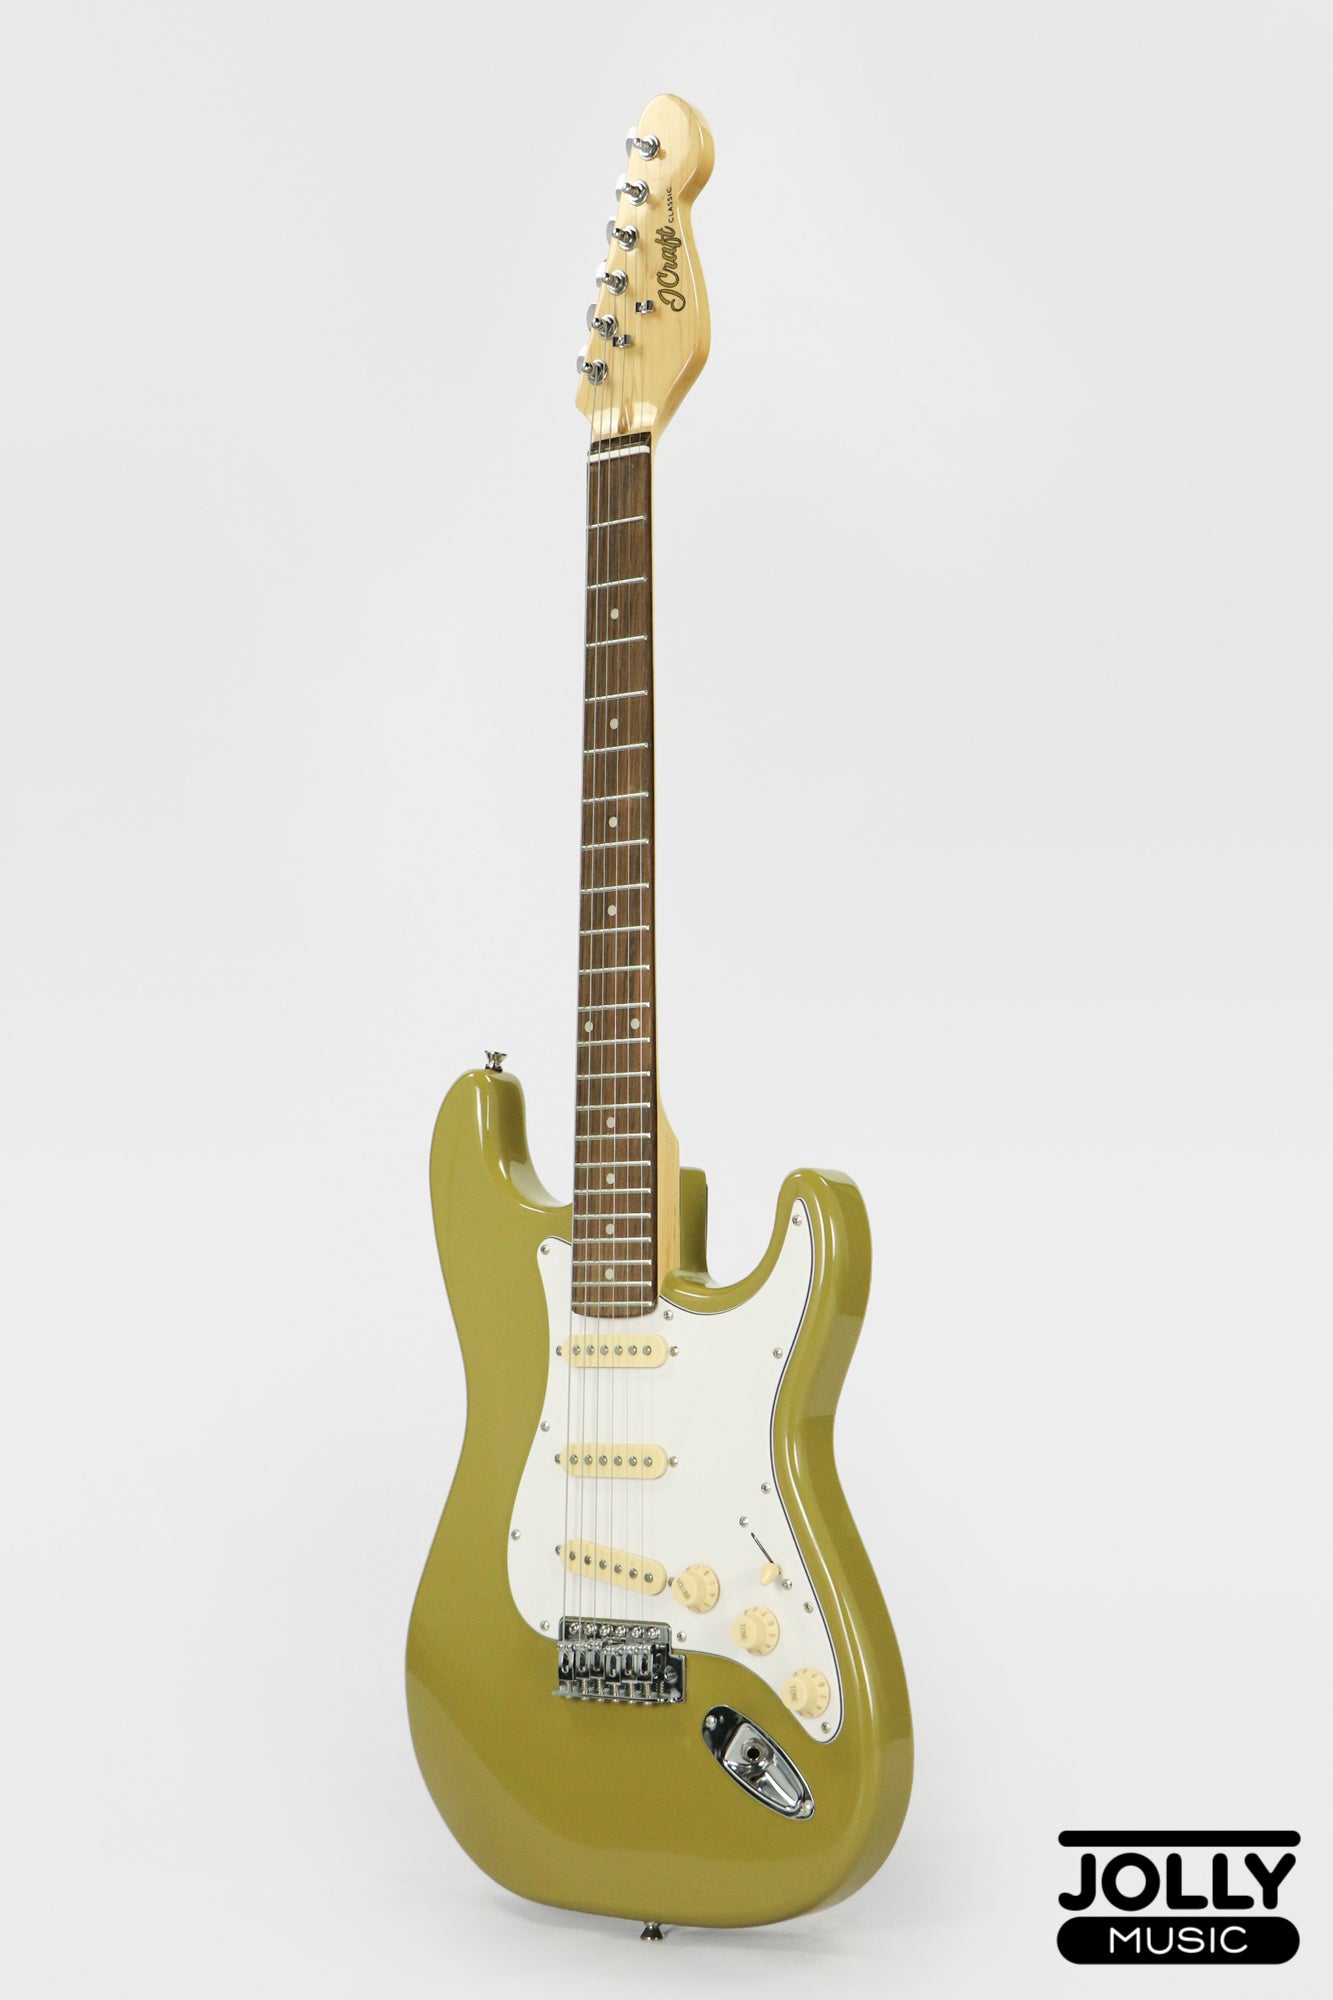 JCraft S-2 S-Style Electric Guitar - RW / Olive Green